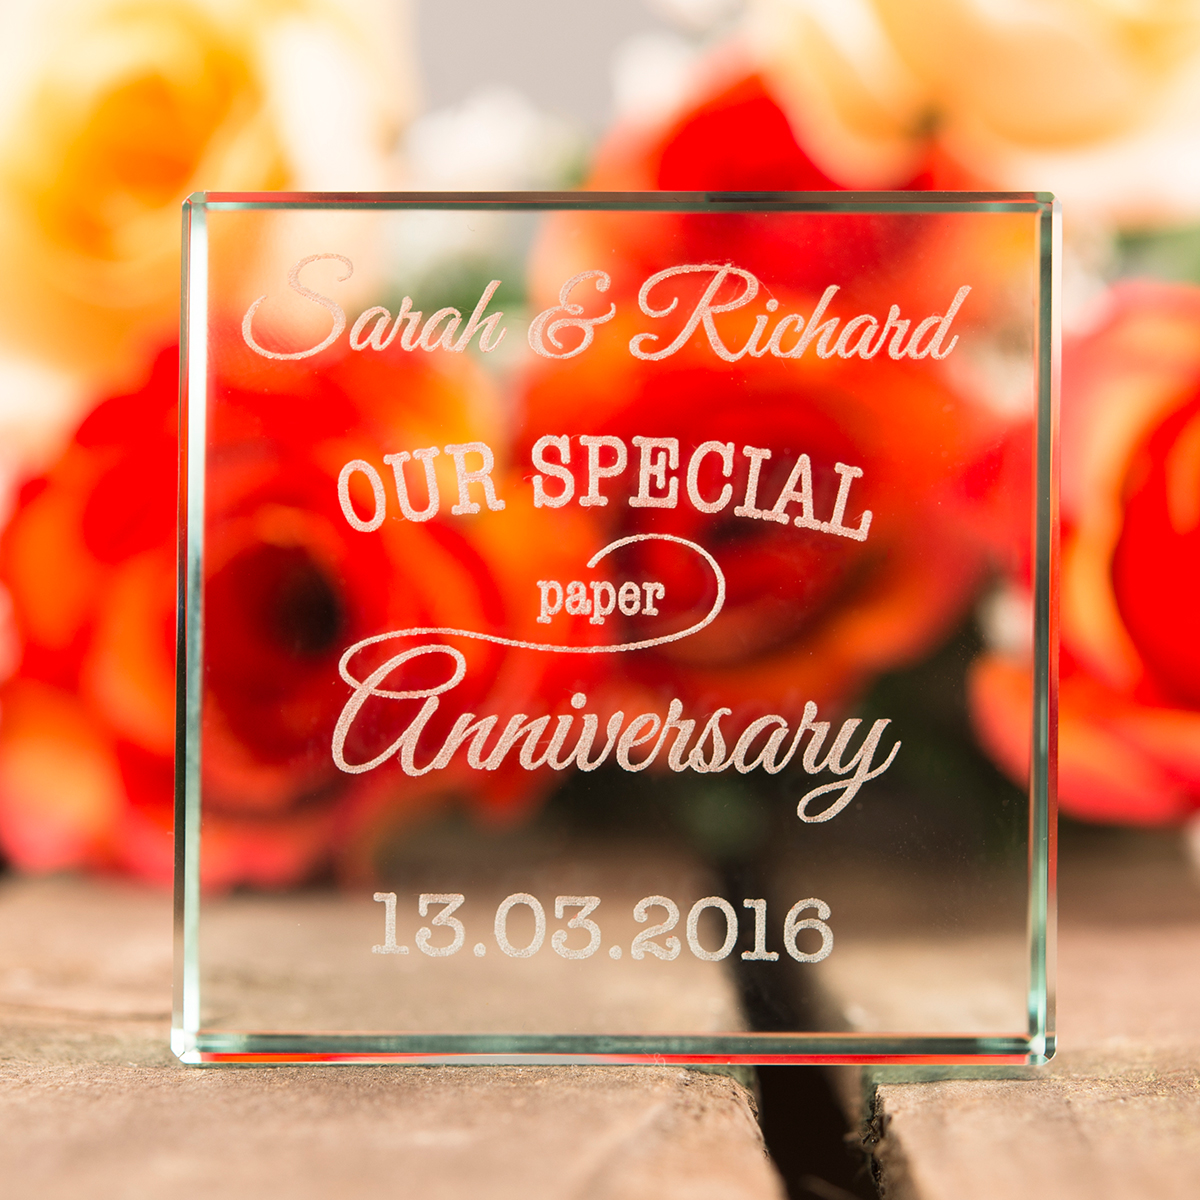 Personalised Engraved Glass Token - Our Special Paper Anniversary